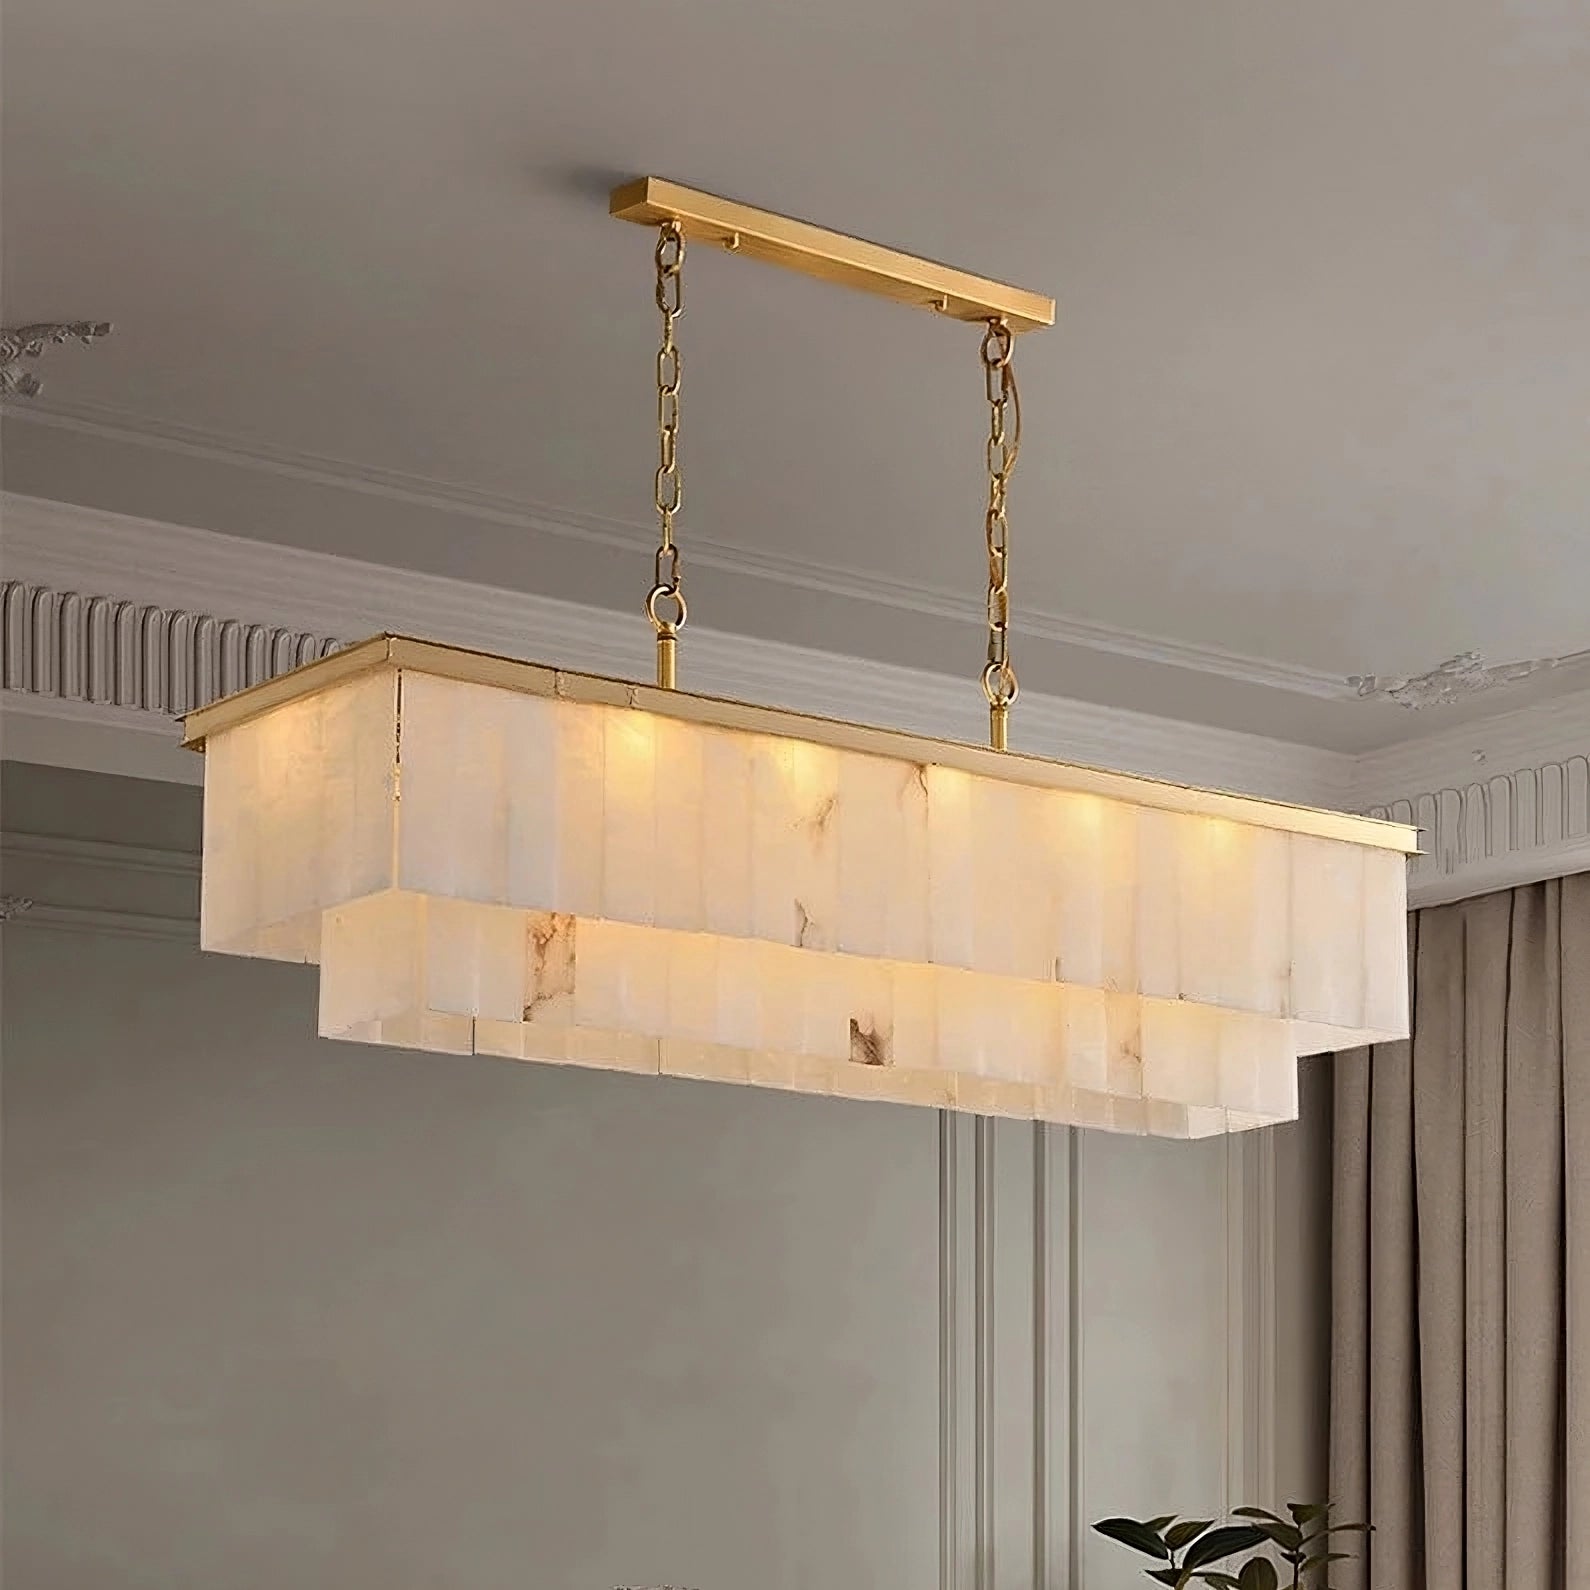 A **Shopp578 Natural Marble Dining Room Chandelier** with a gold frame and brass accents hangs from the ceiling by two gold chains. The chandelier features multiple layers of translucent panels, softly glowing with warm light, illuminating the elegant room with decorative molding and beige curtains.